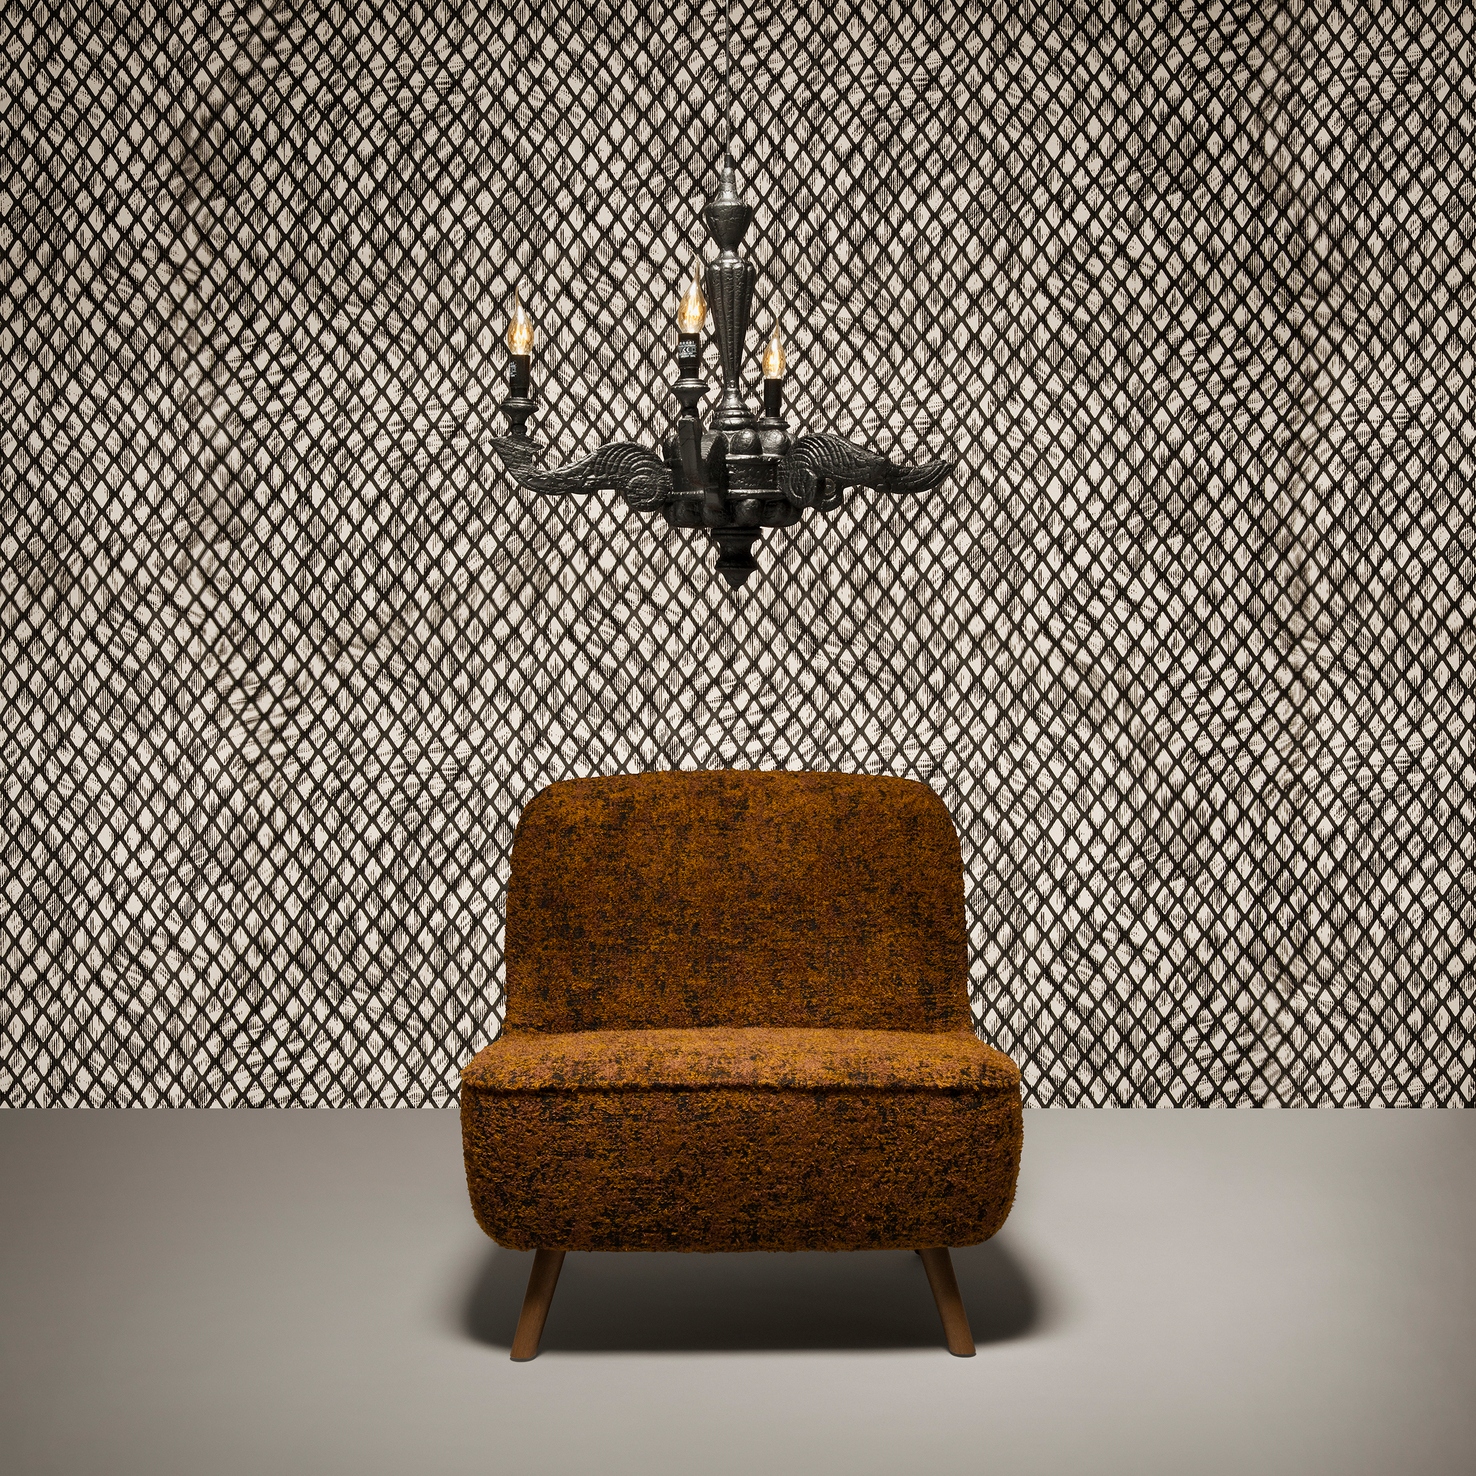 Poetic composition Cocktail Chair, Smoke Chandelier and Moooi Wallcovering